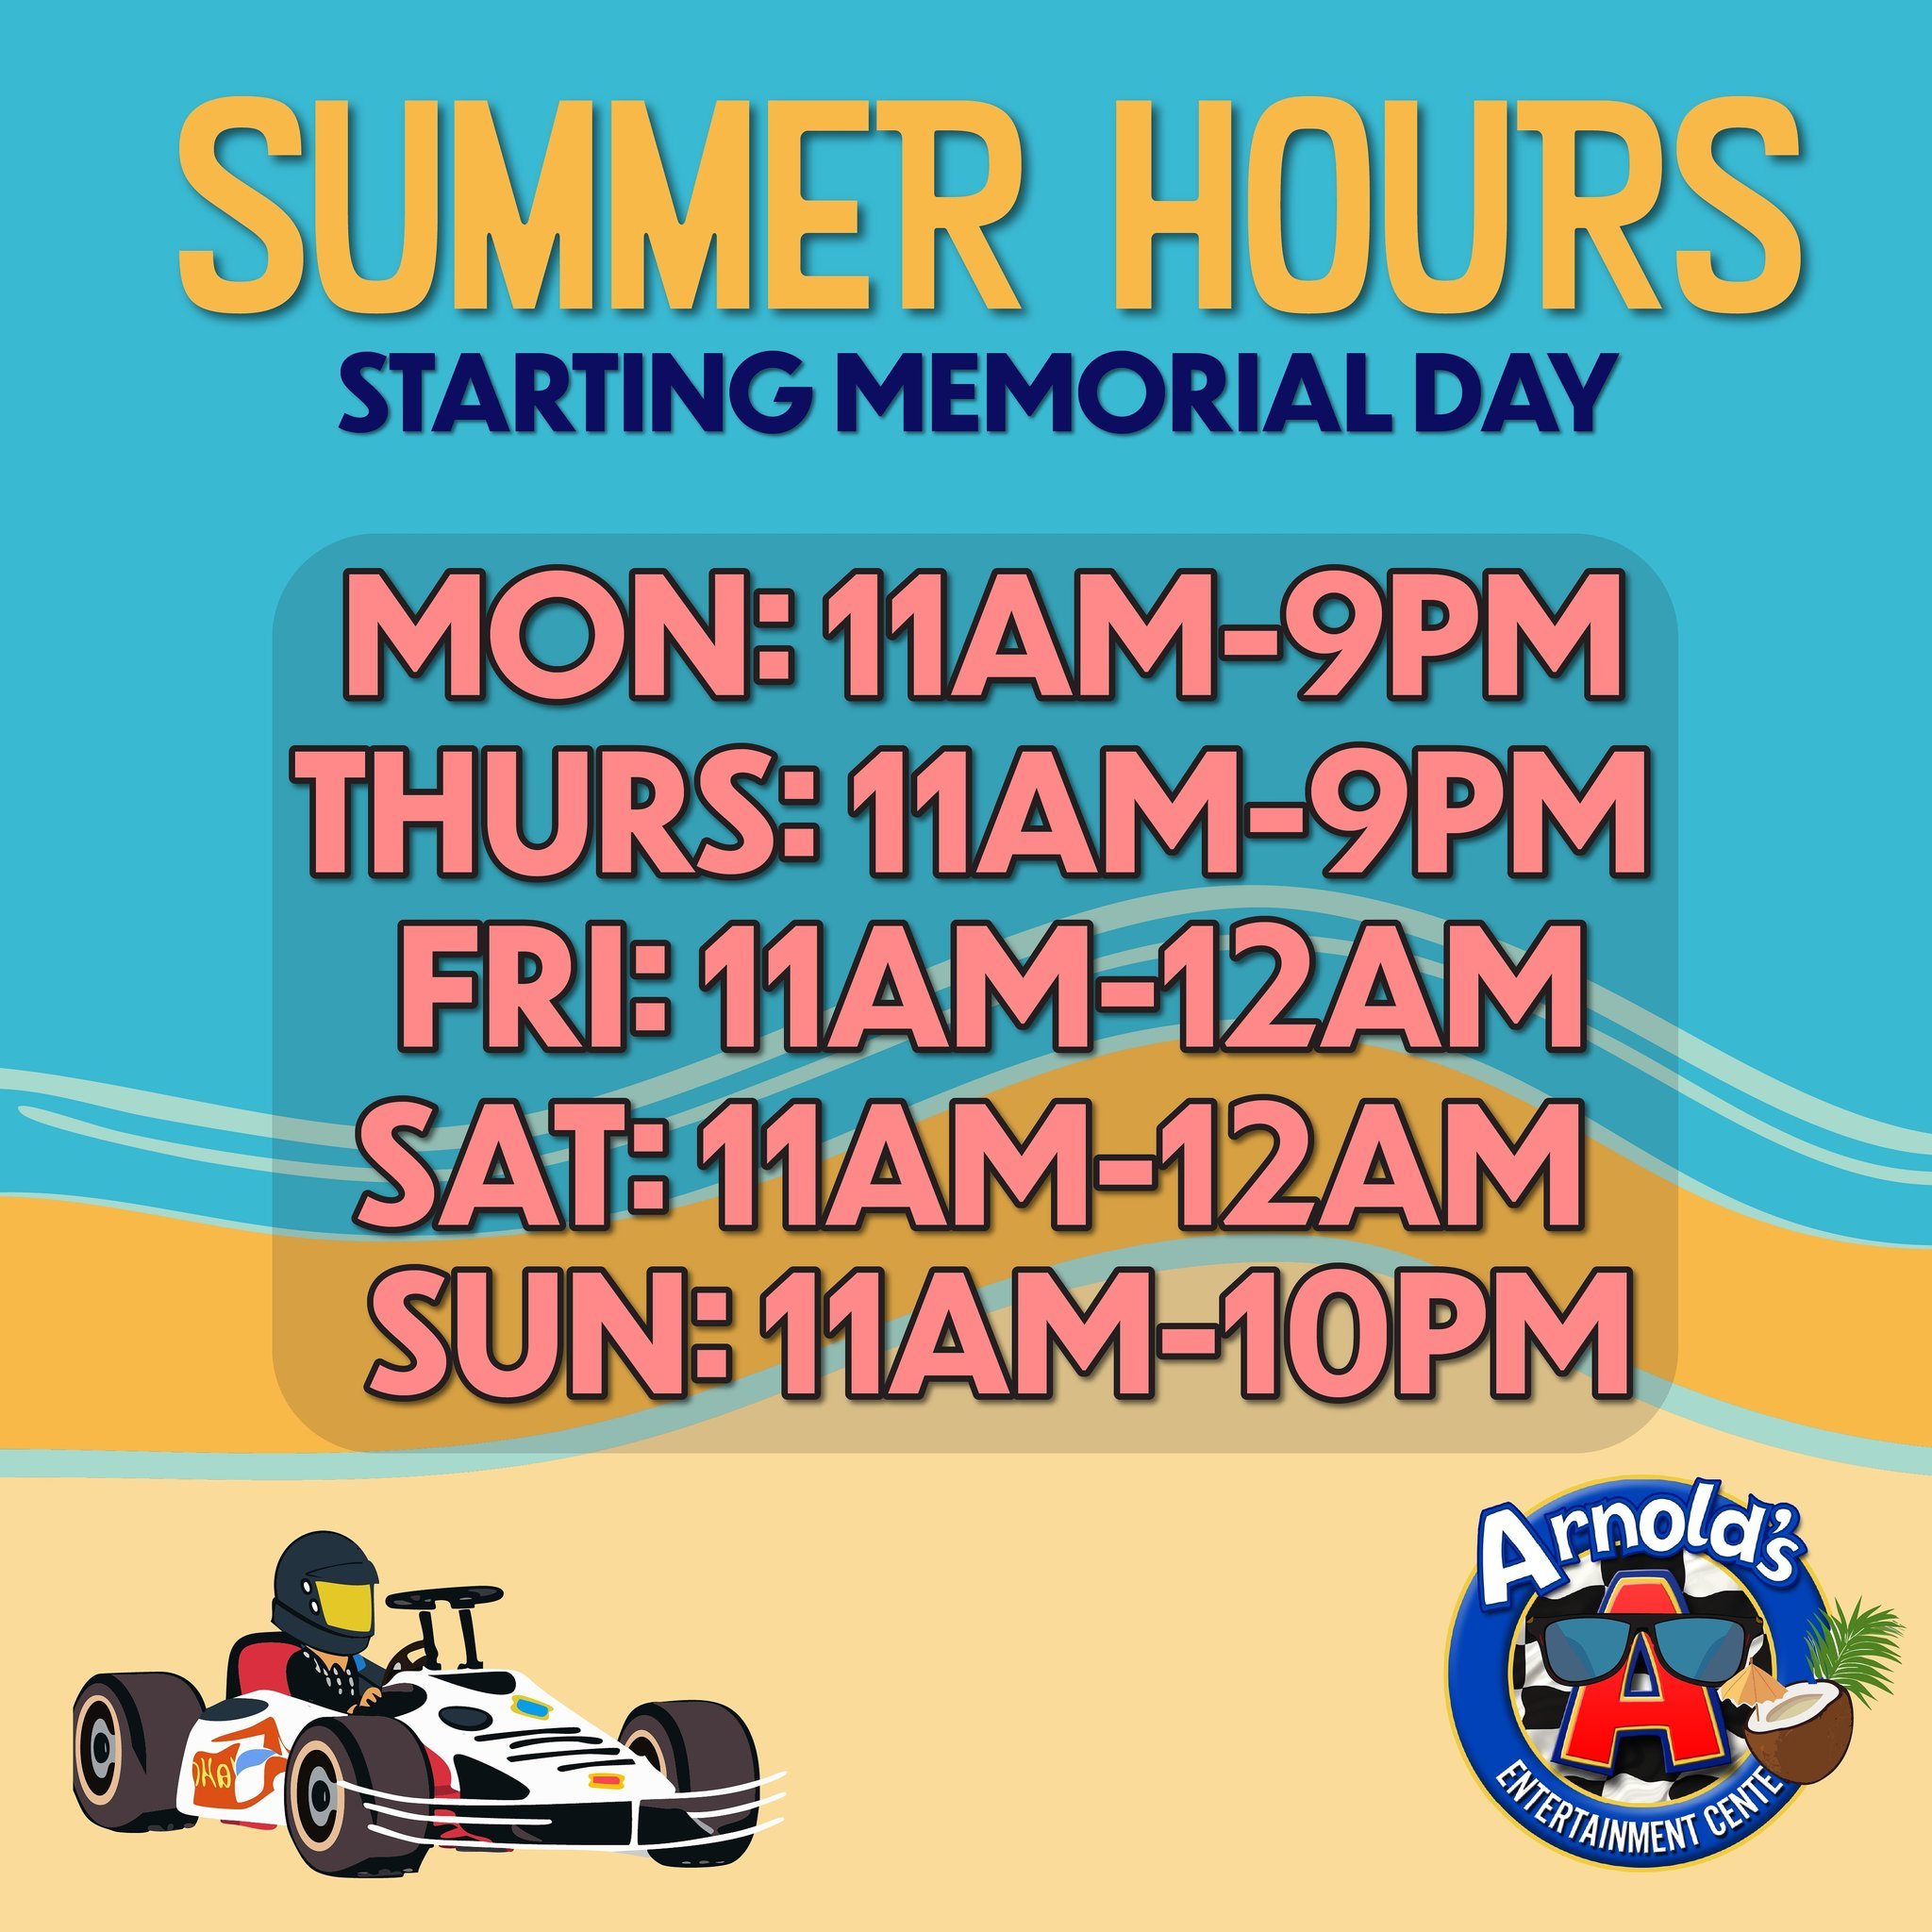 😎We&rsquo;ve got new #summer hours! Starting on Memorial Day! 

#summer #beattheheat #memorialday #newhours